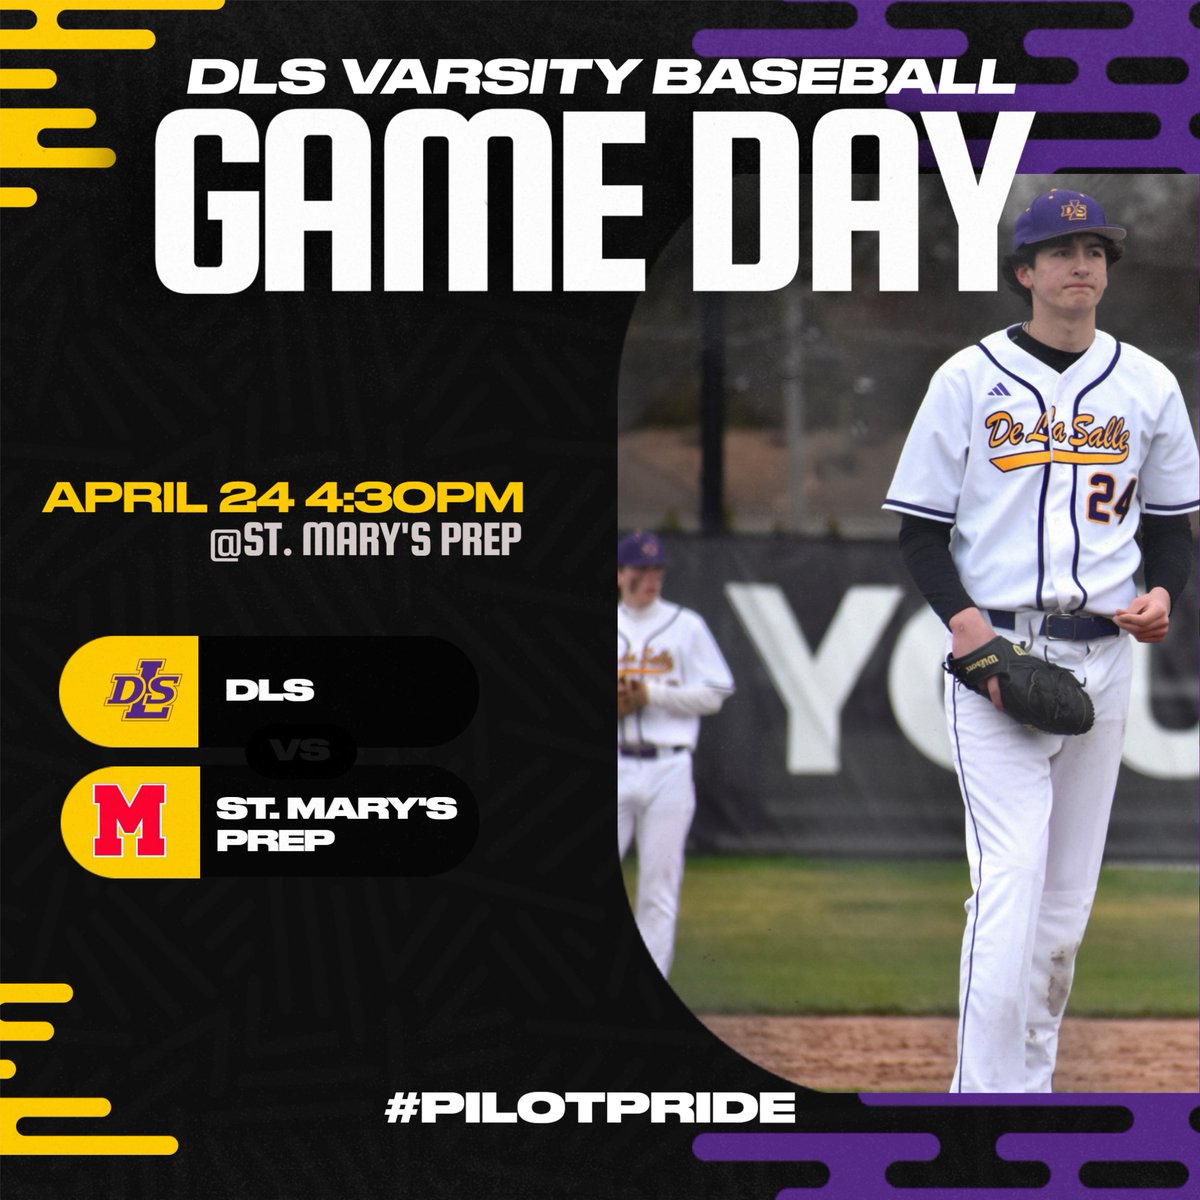 Good luck to DLS Varsity Baseball as they go up against St. Mary’s Prep at 4:30PM today, April 24, at St. Mary's Prep. Let’s go, Pilots! 

#PilotPride @Pilots_Baseball @CHSL1926